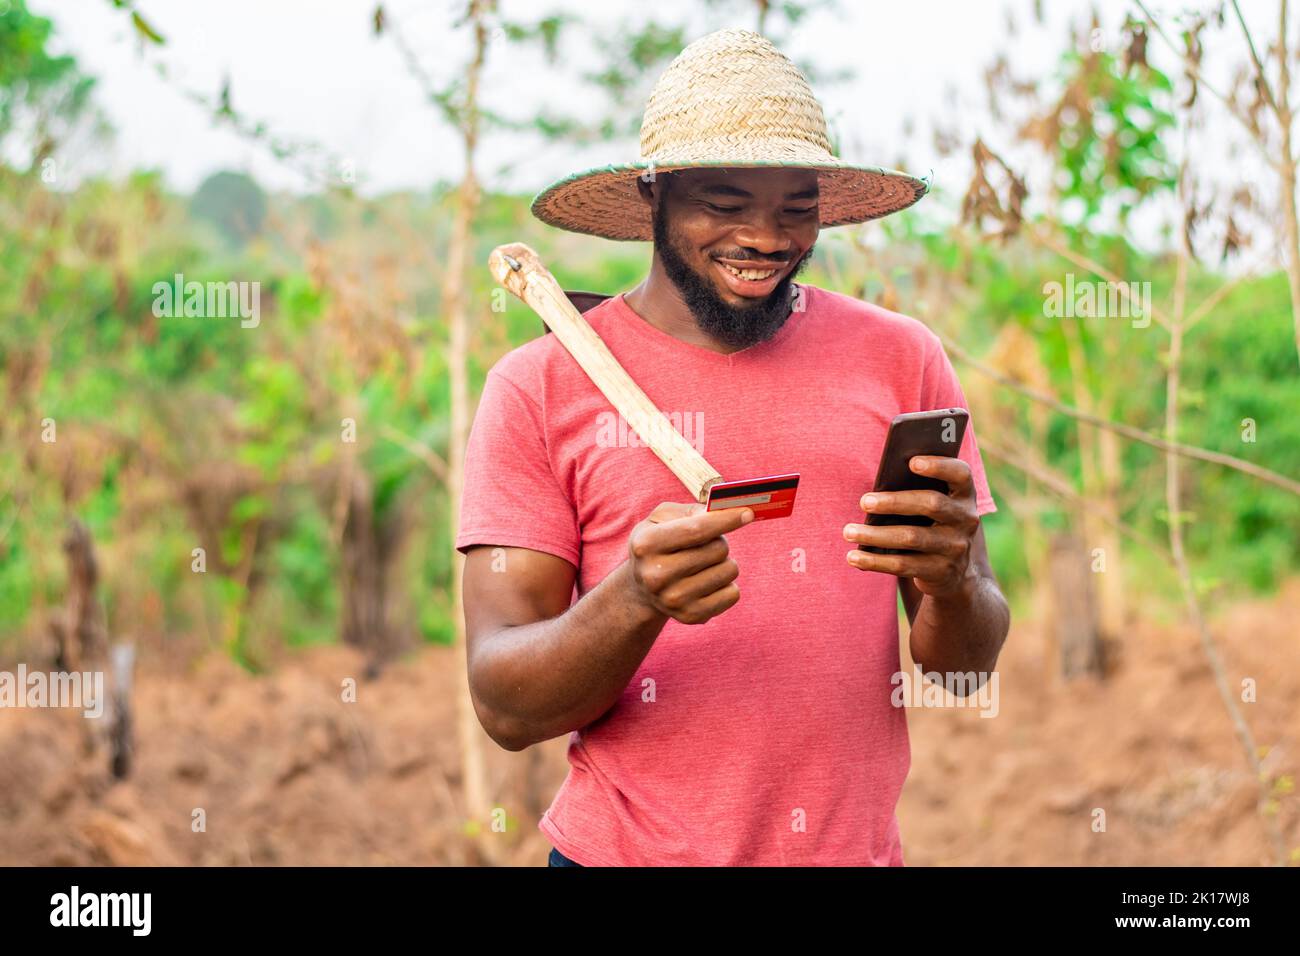 african farmer using his phone and credit card Stock Photo